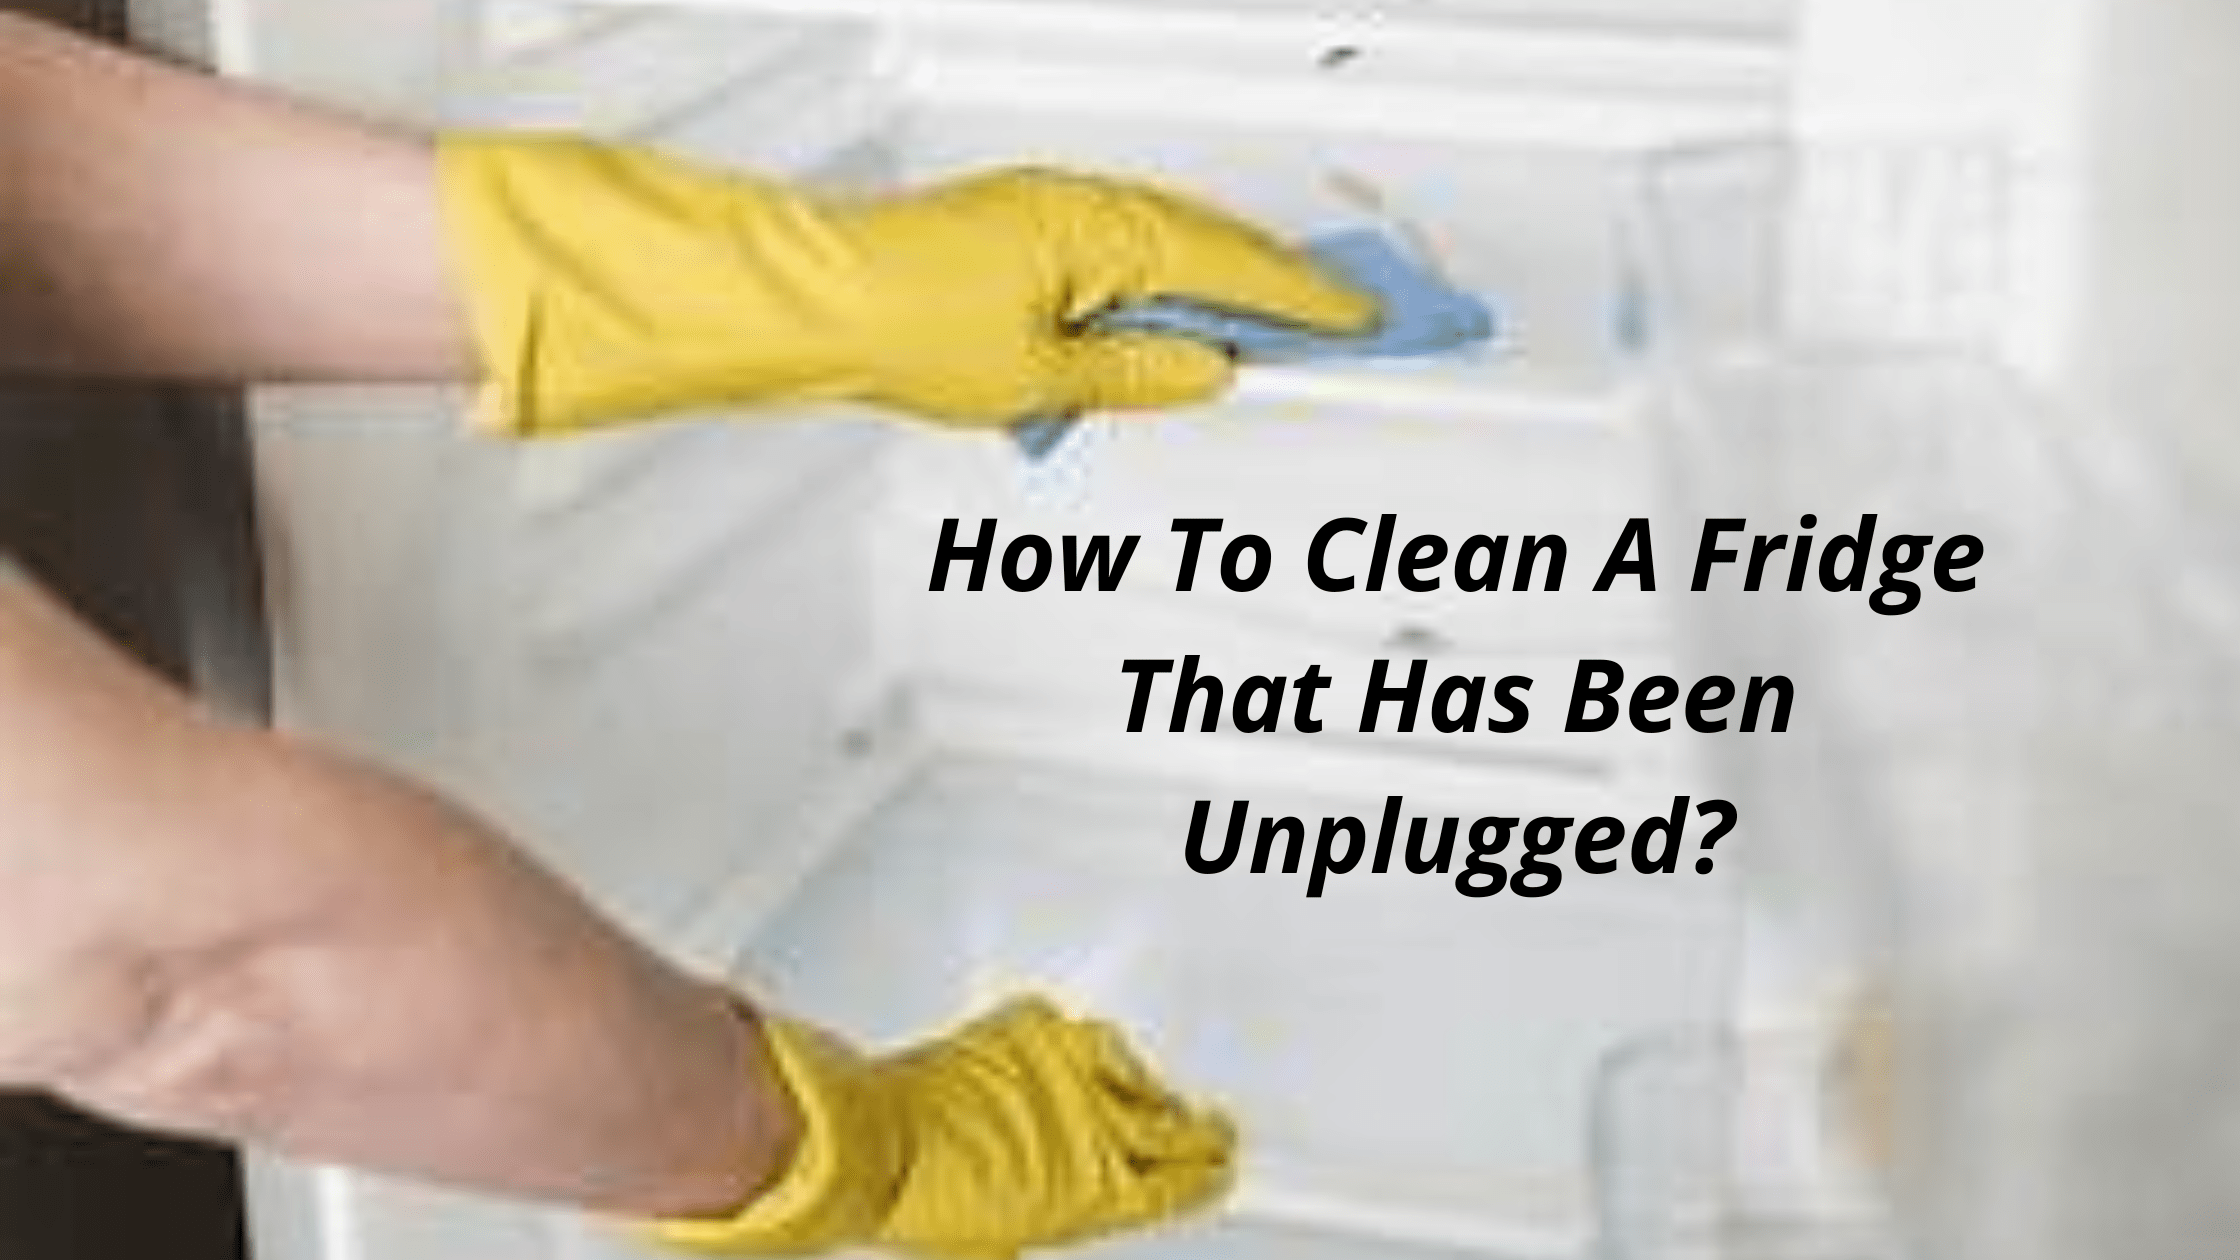 How To Clean A Fridge That Has Been Unplugged?